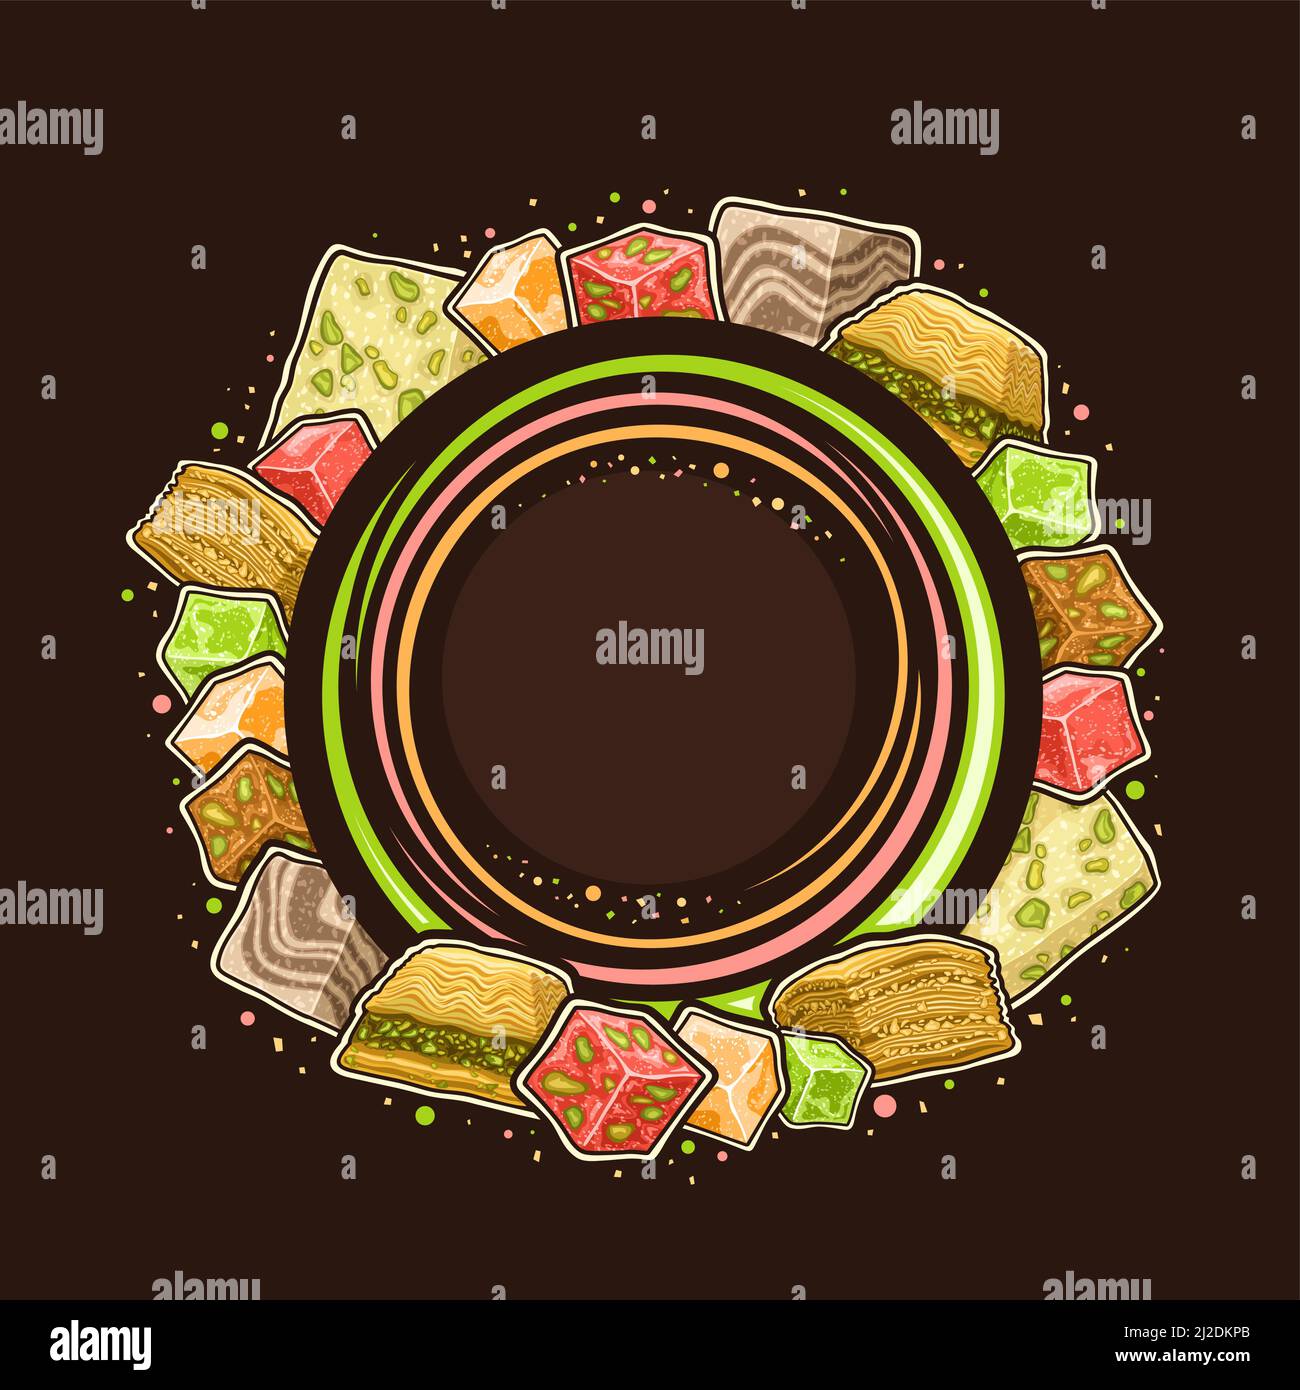 Vector Frame for Arabian Sweets with copyspace for text, decorative sign board with illustration of traditional greek baklava, homemade rahat lokum sl Stock Vector